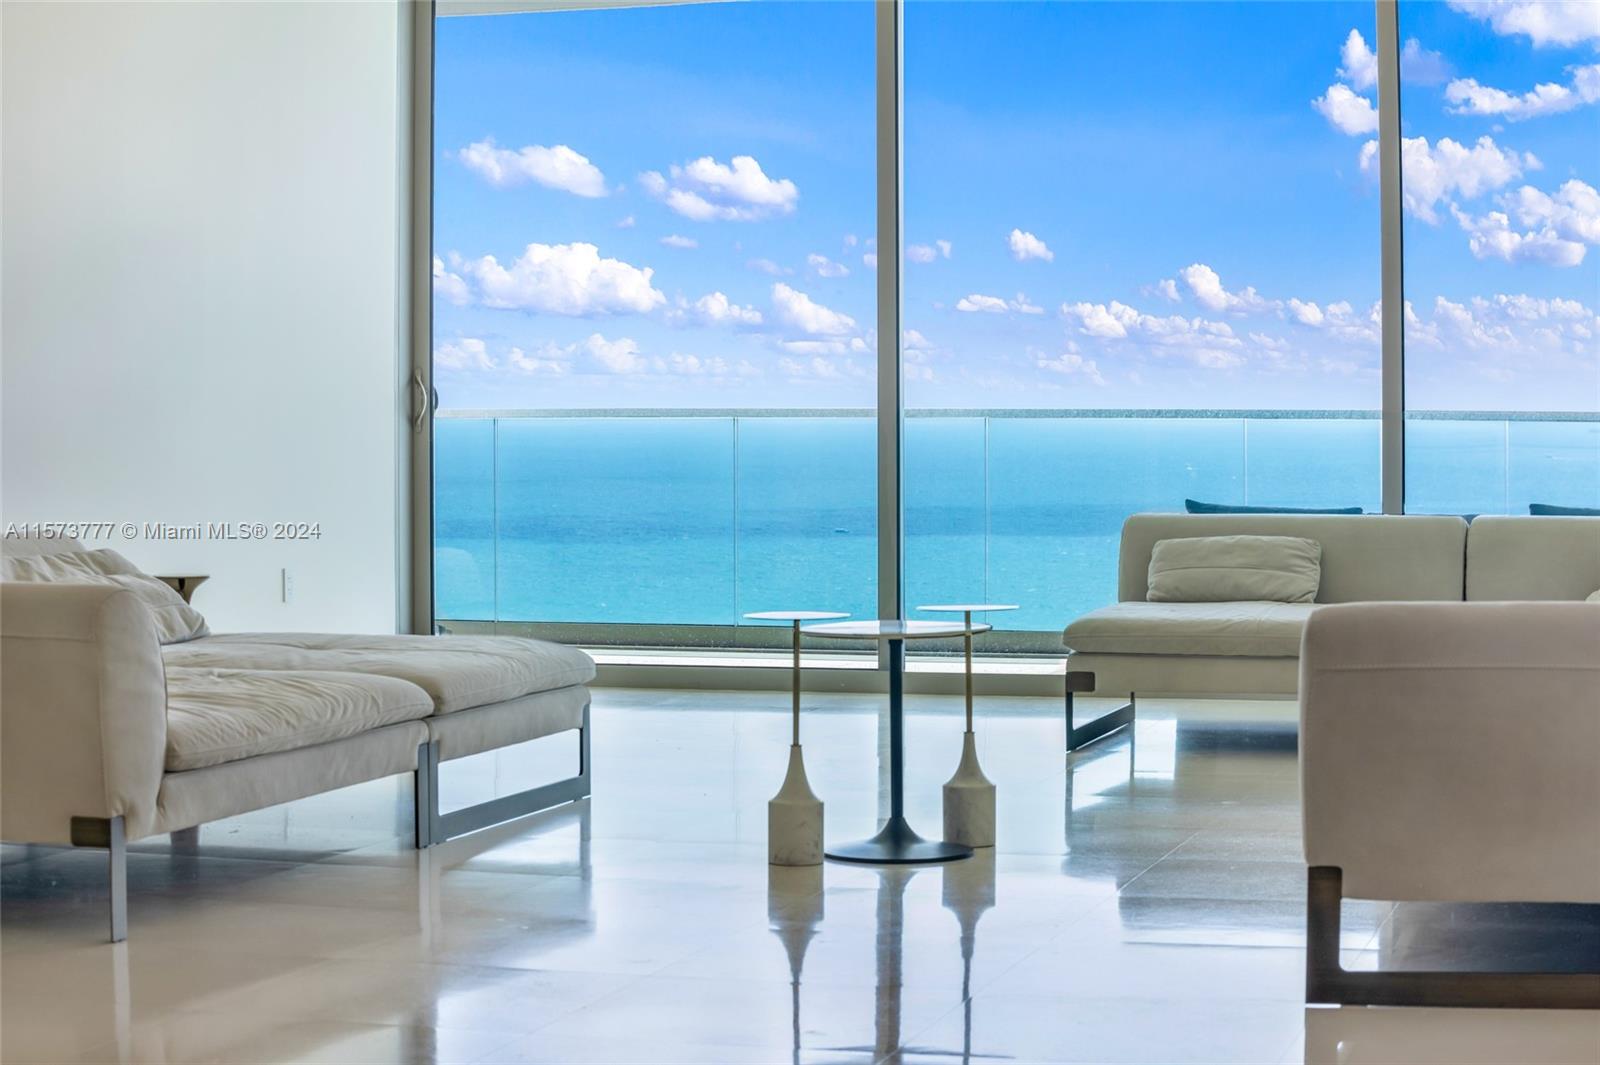 Enjoy breathtaking ocean views from this gorgeous 2 bedrooms plus den & 3 1/12 baths residence located on the 25th at the luxurious Oceana Bal Harbour Condominium. This unit showcases an spacious floor plan with high end Gaggenau appliances and tastefully décor in every room. This luxury waterfront building offers unrivaled amenities, including private beach access,2 tennis courts , kids club, movie theater, social room, upscale Italian restaurant on site, exercise room , state of the art spa and much more! Walk to the renowned Bal Harbour Shops.See Broker's remarks for additional information.